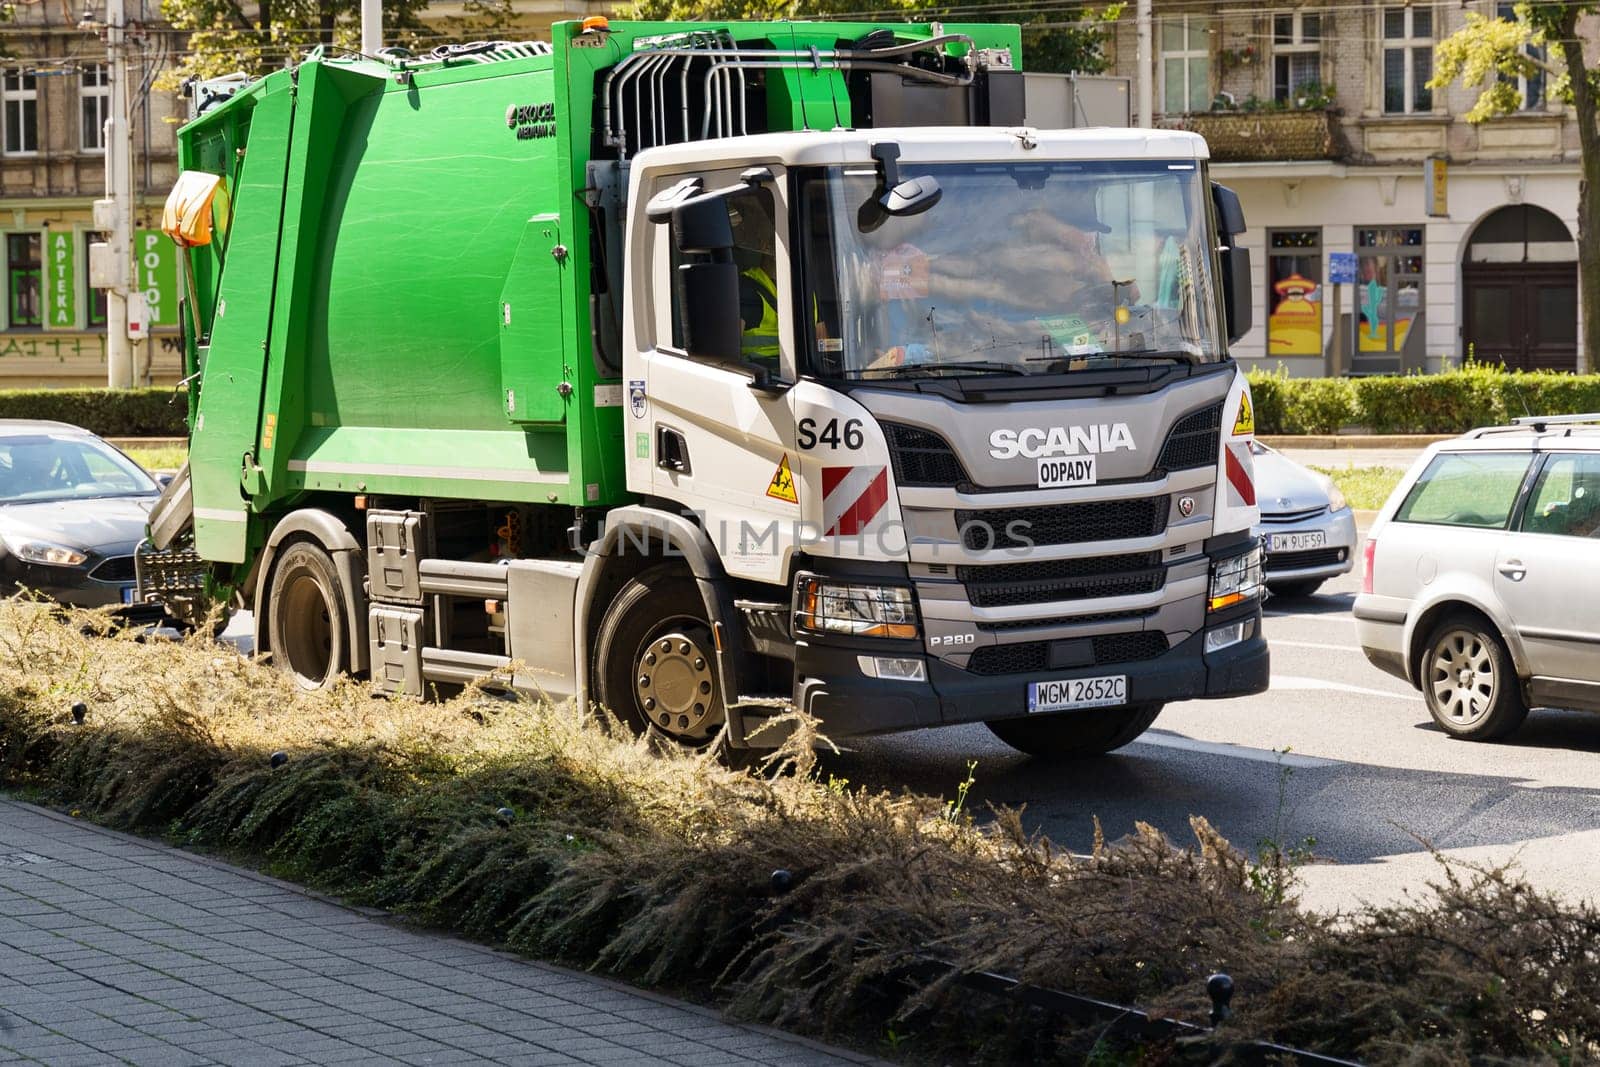 Wroclaw, Poland - August 4, 2023: A green and white Scania garbage truck is actively collecting waste along a busy city street with buildings and other vehicles visible in the background.